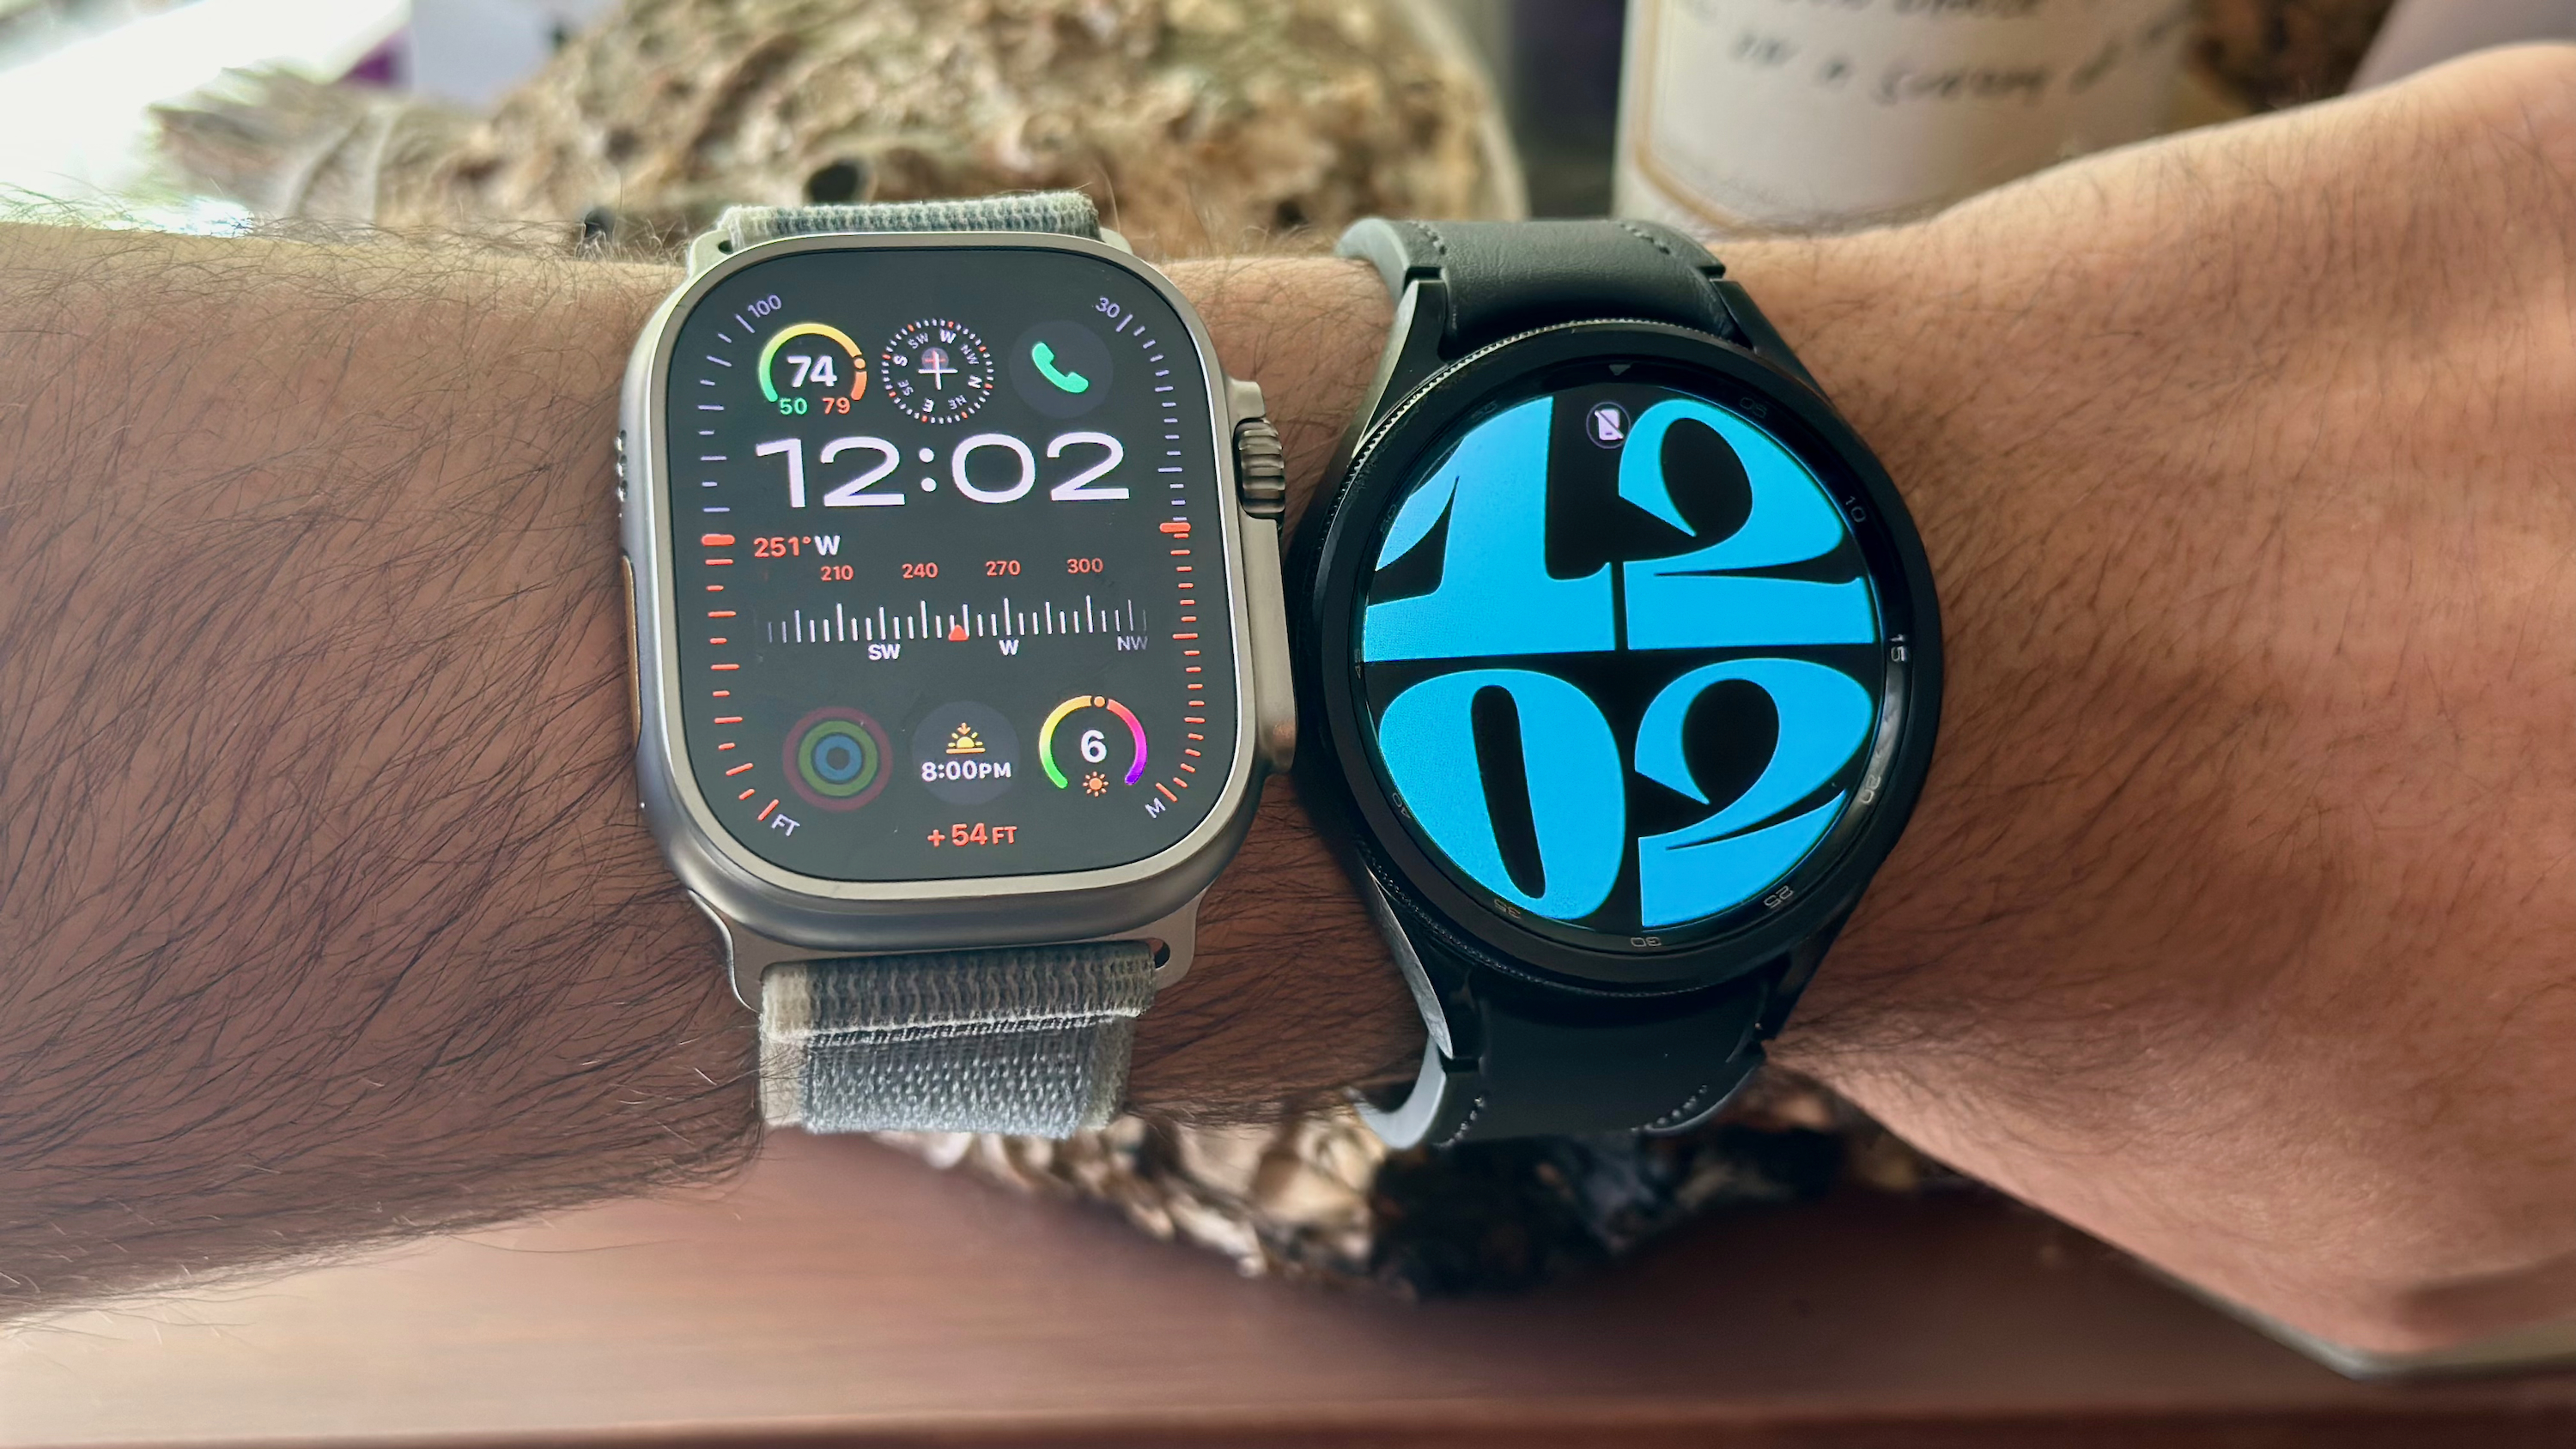 The Apple Watch Ultra 2 (left) and the Samsung Galaxy Watch 6 Classic (right) worn on one wrist.